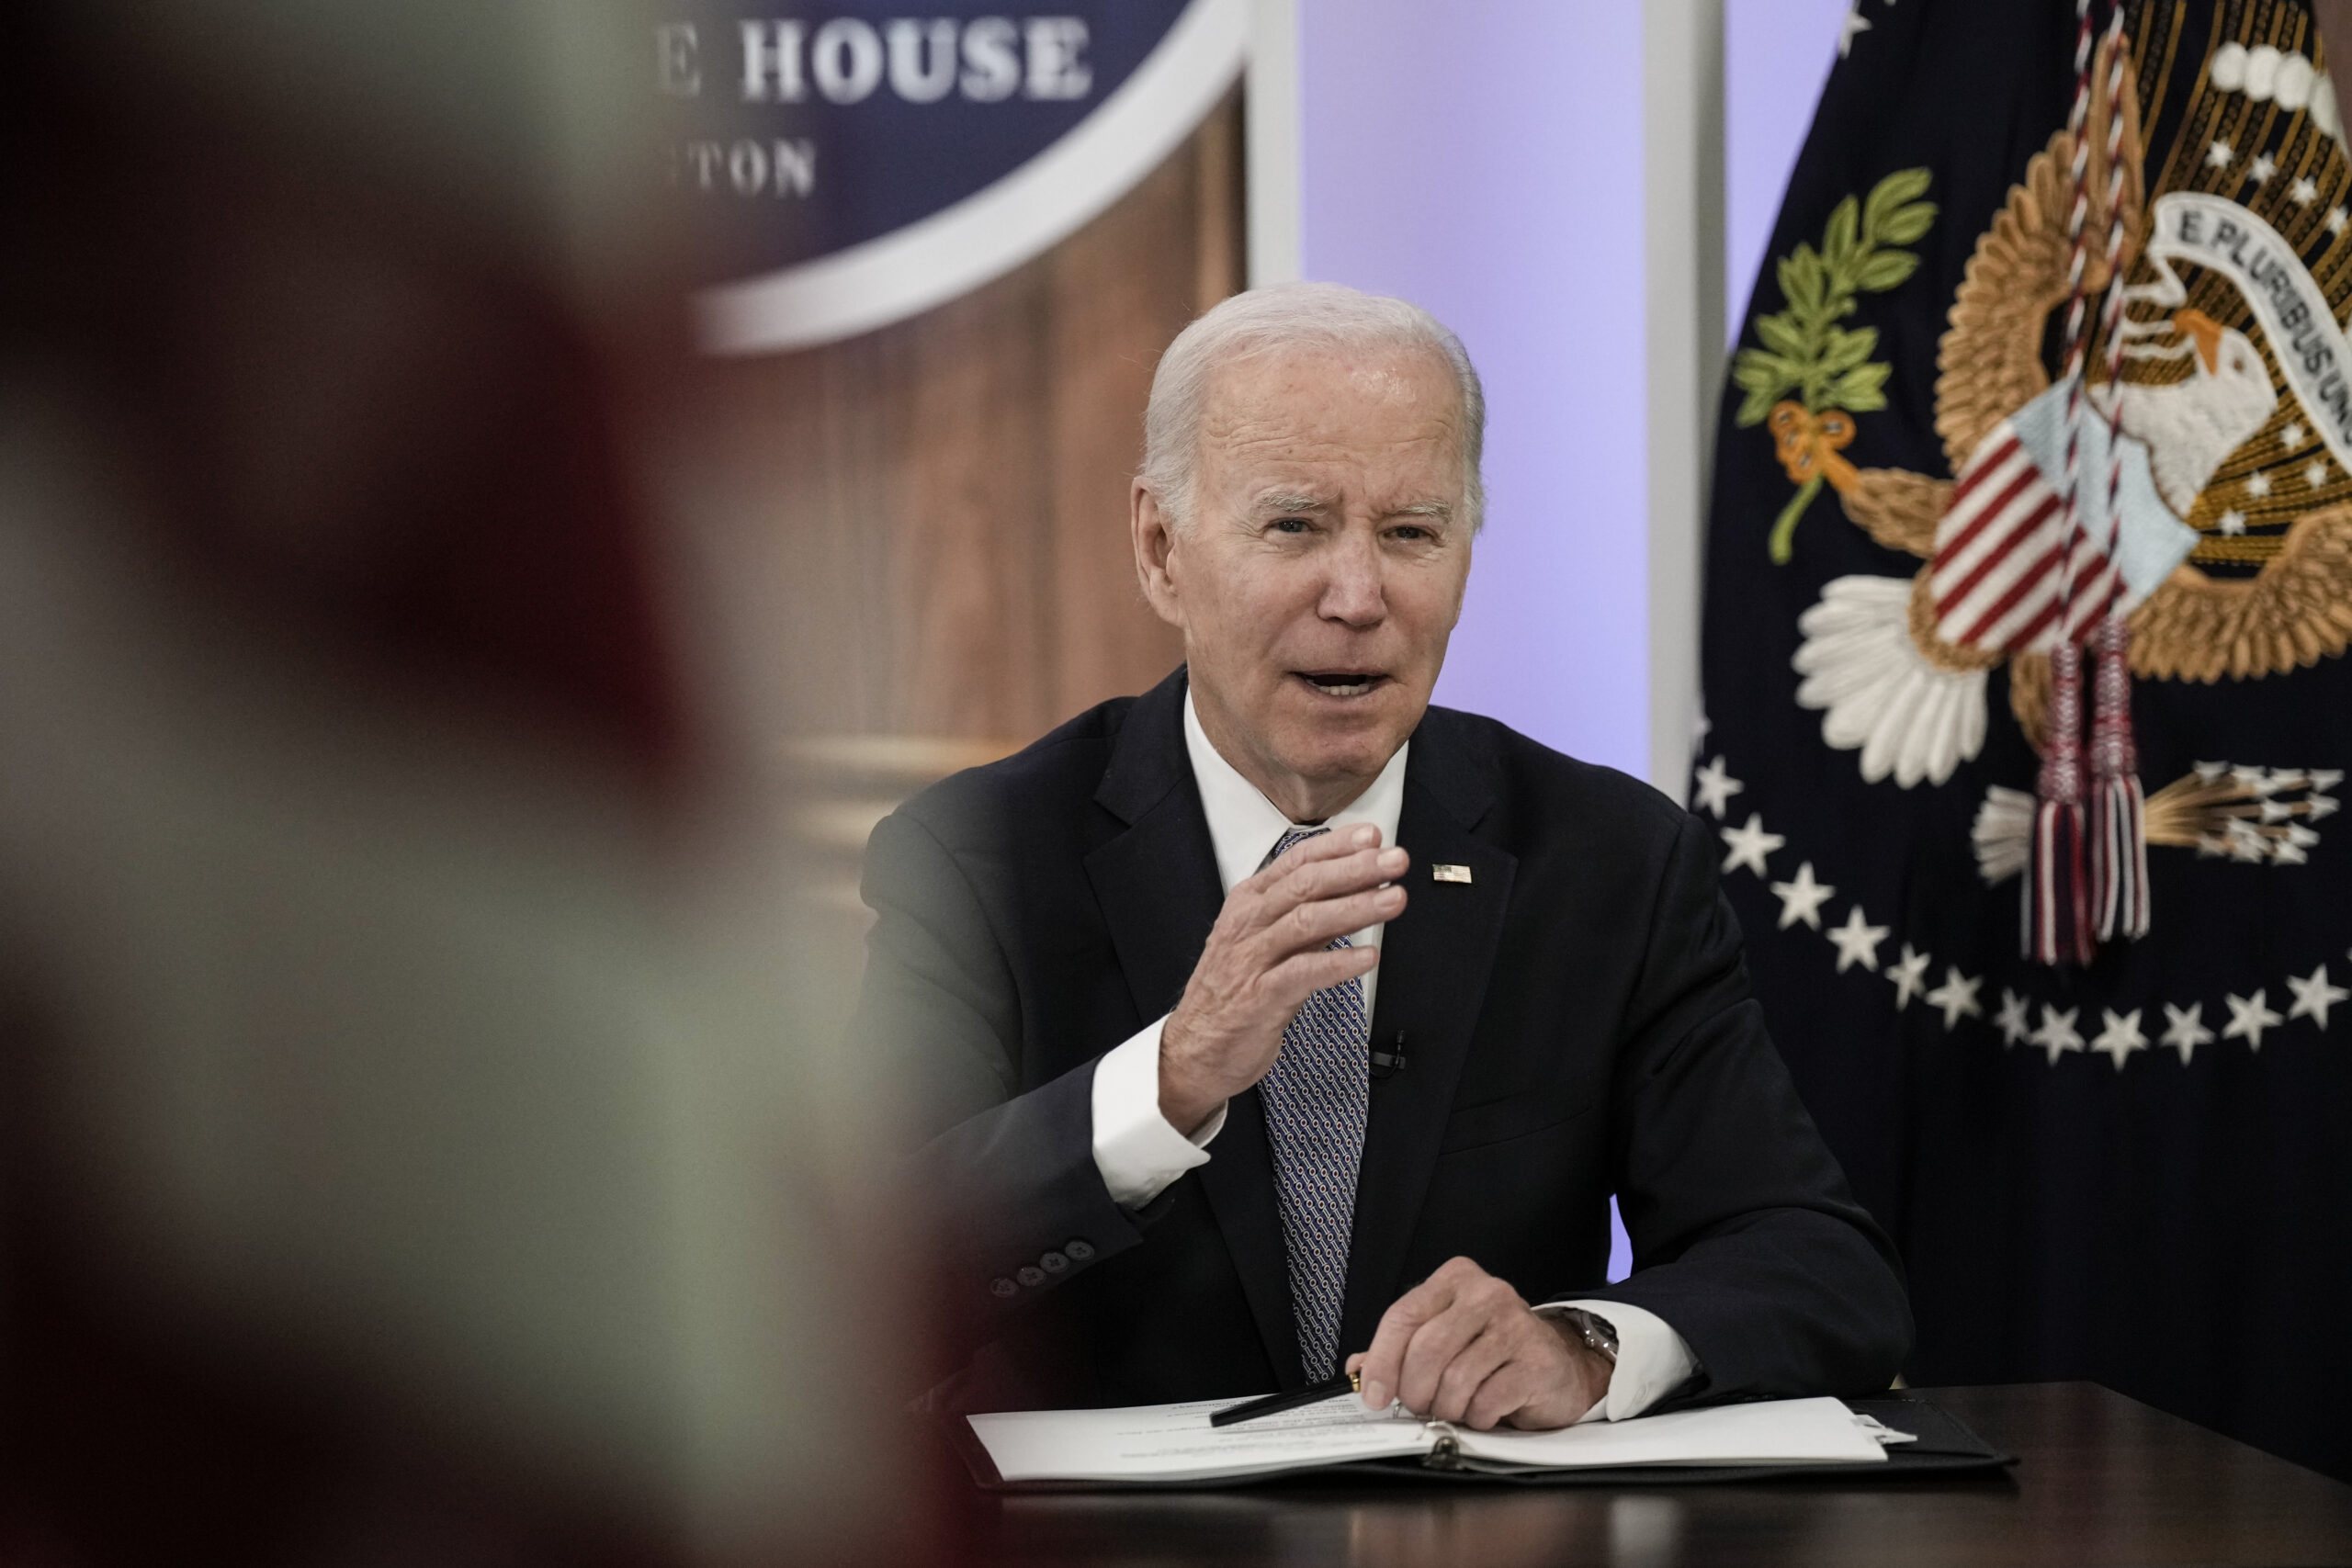 Poll: Most Americans doubt Biden’s fitness for second term.